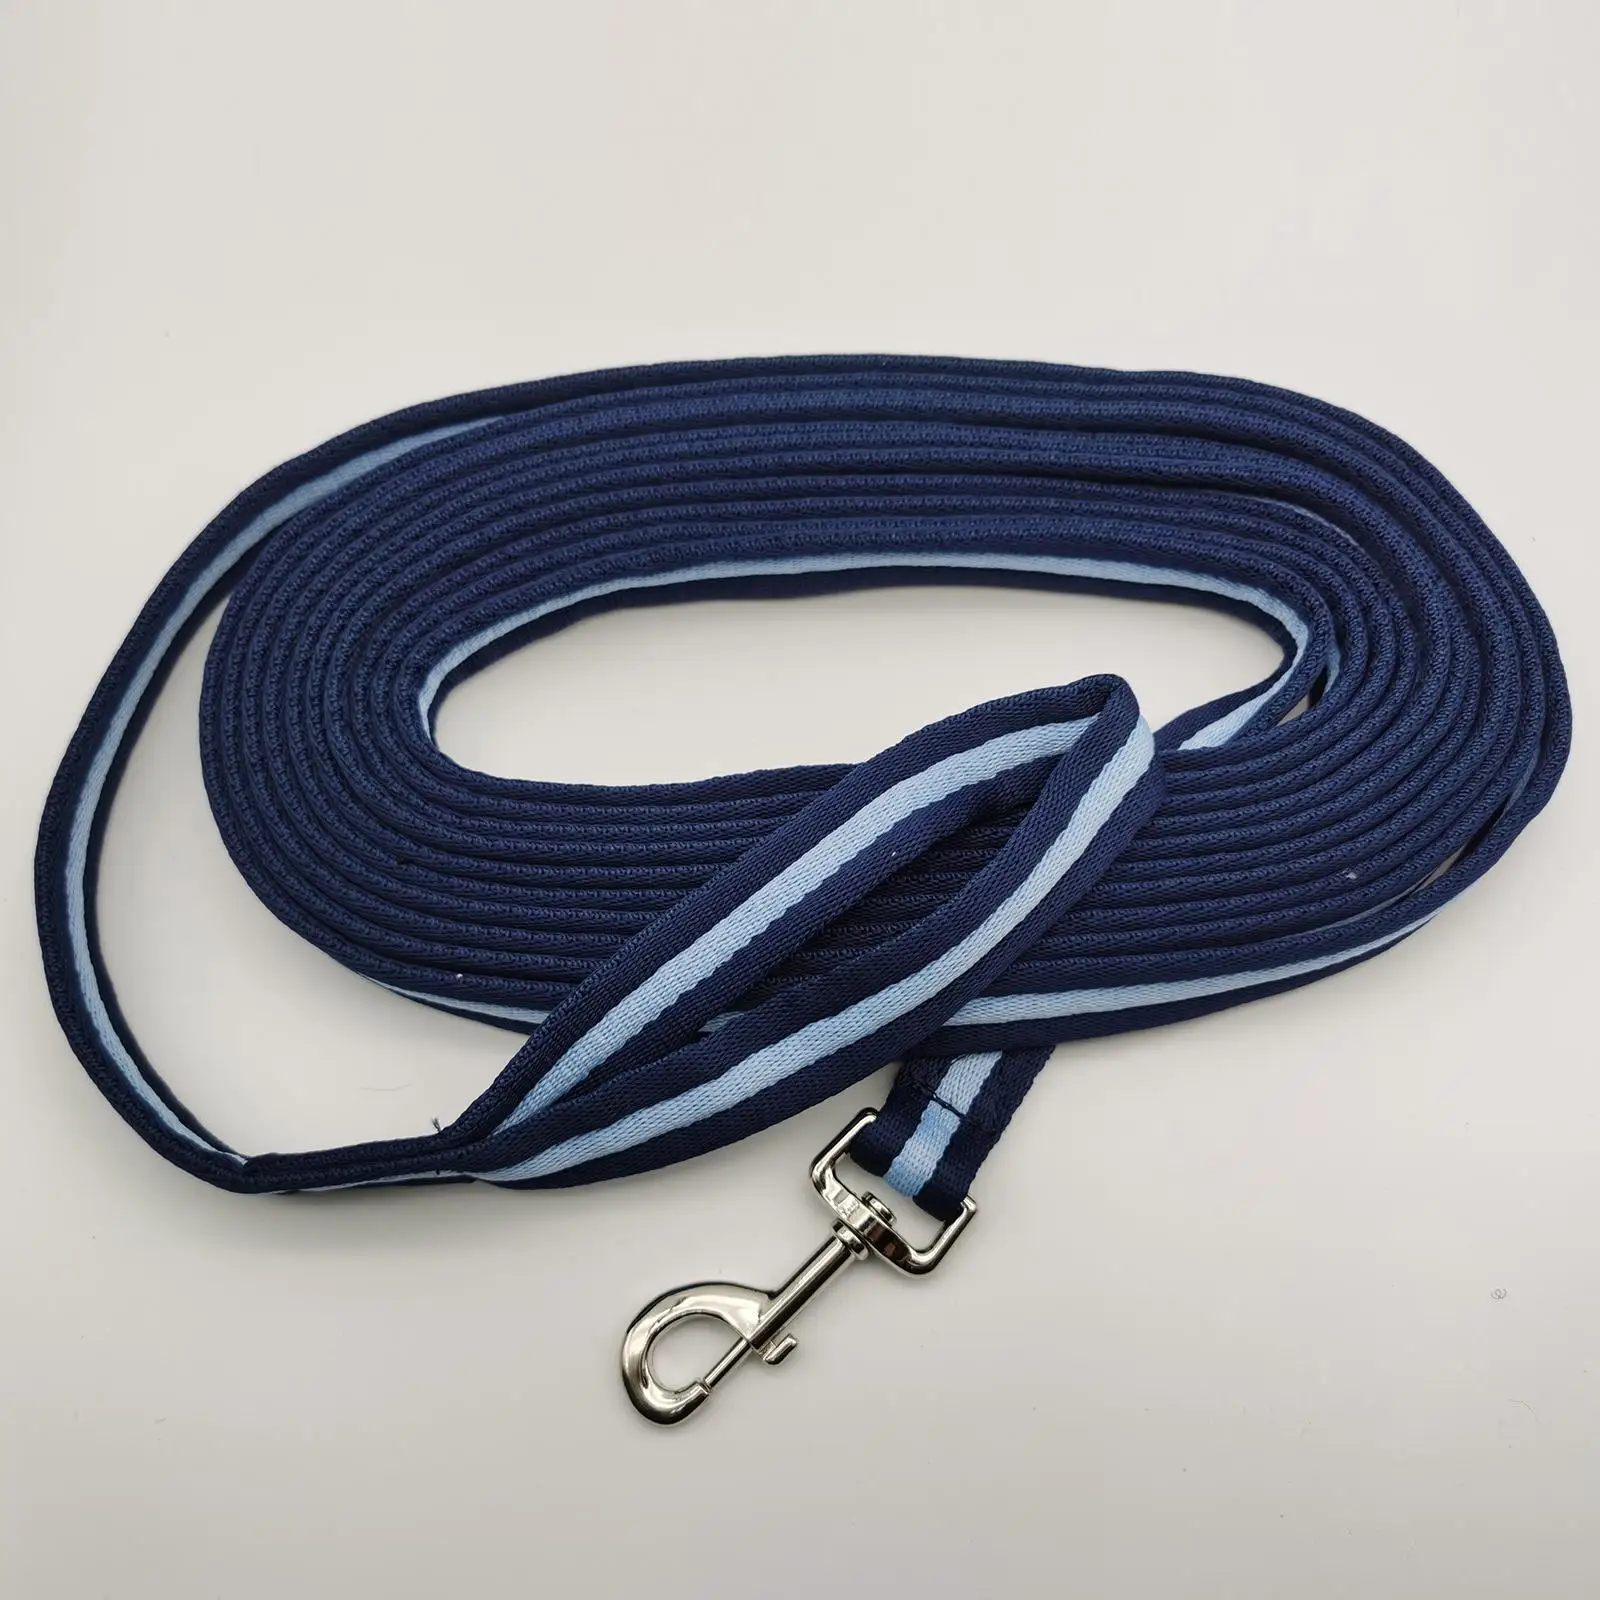 Horse Dog Training Leash Super Strength Webbing Long Line Heavy Duty Horse Rope Lead for Small Medium Large Dogs Horse Training